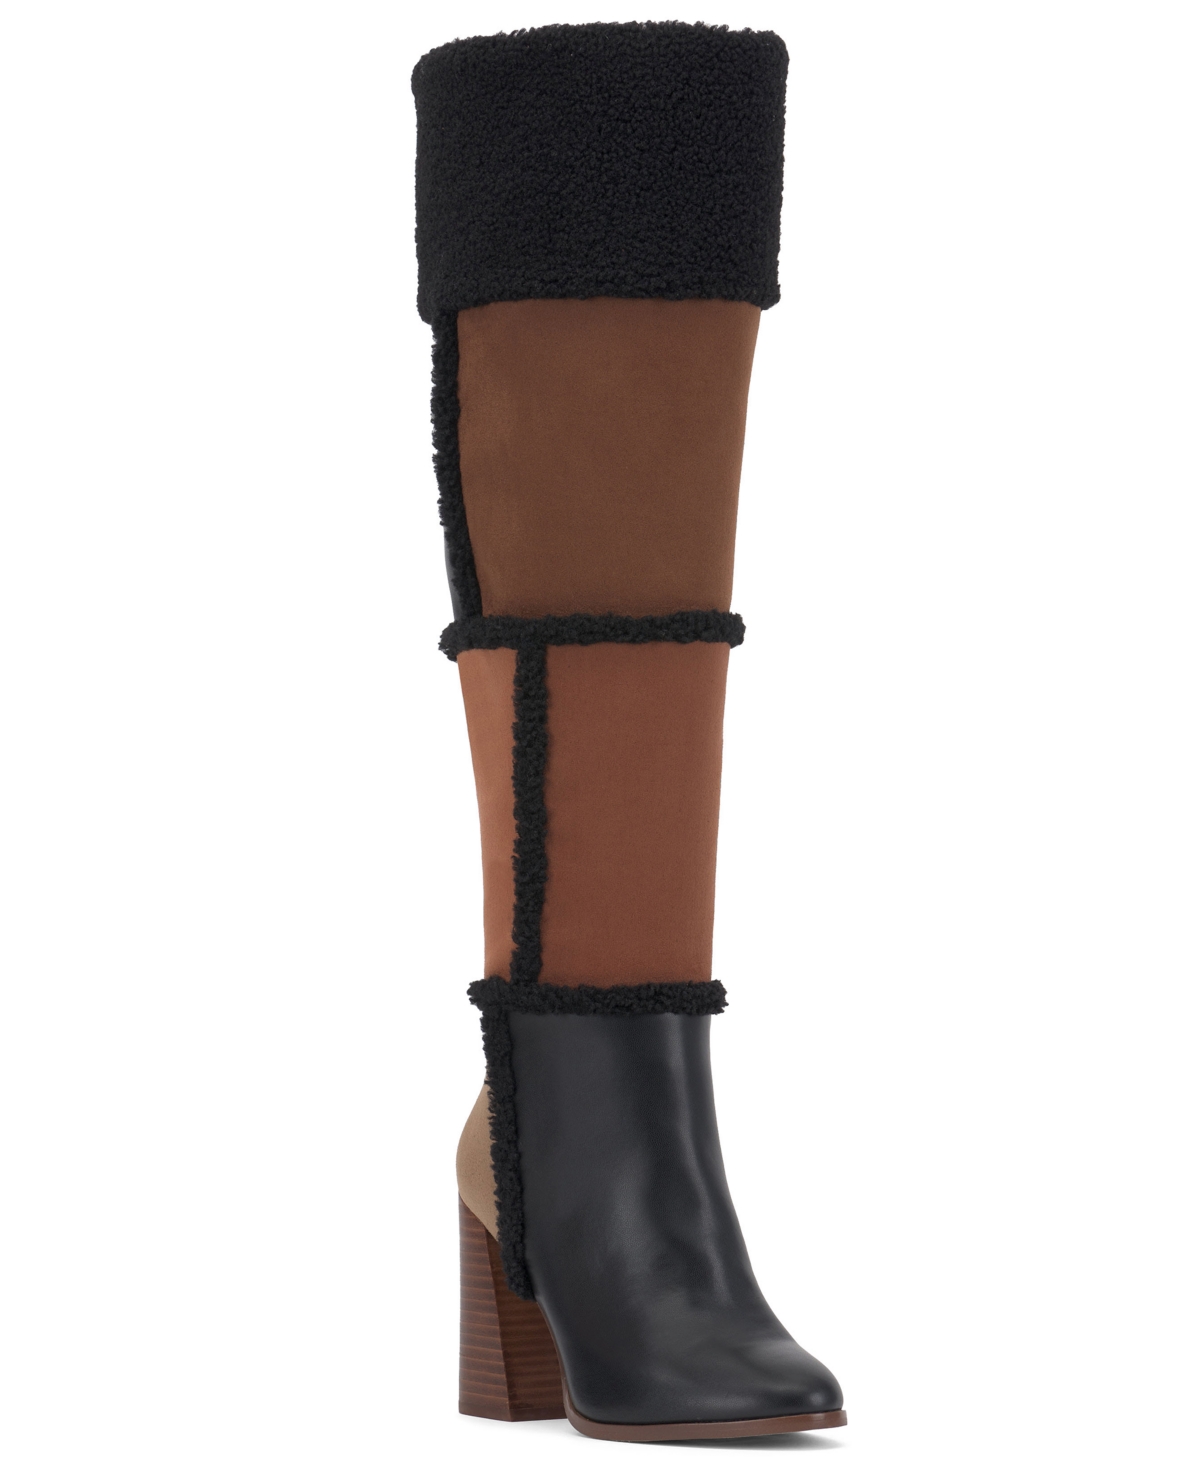 JESSICA SIMPSON RUSTINA OVER-THE-KNEE BOOTS